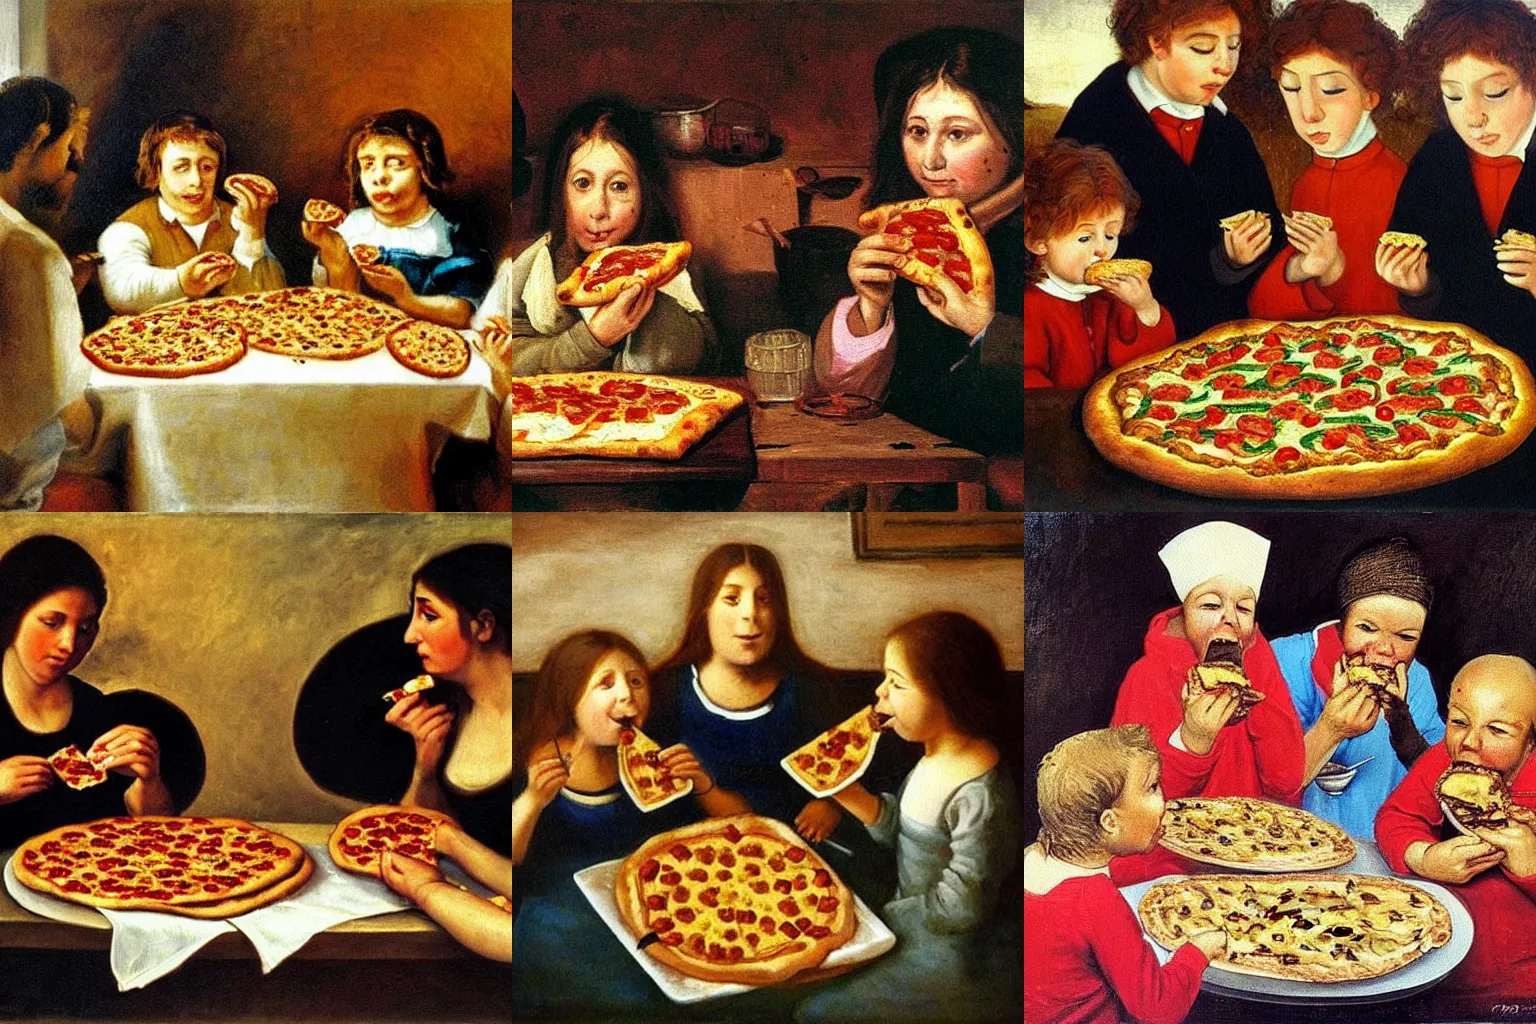 Prompt: the famous painting of the potato eaters but they are eating pizza instead of potatoes